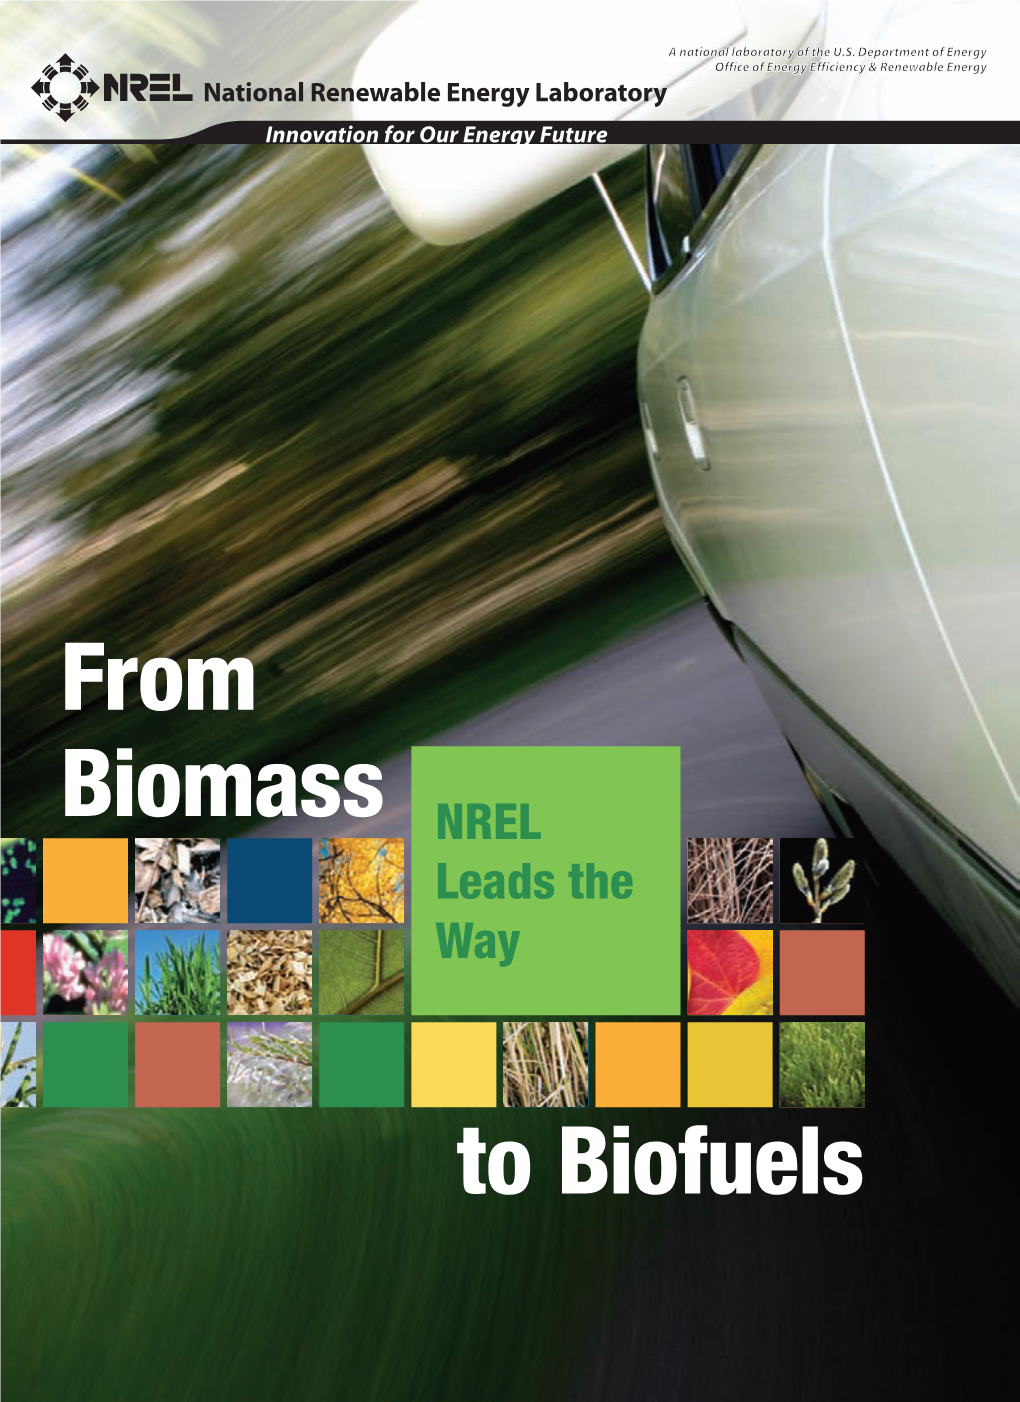 From Biomass to Biofuels: NREL Leads the Way. National Renewable Energy Laboratory (Brochure)